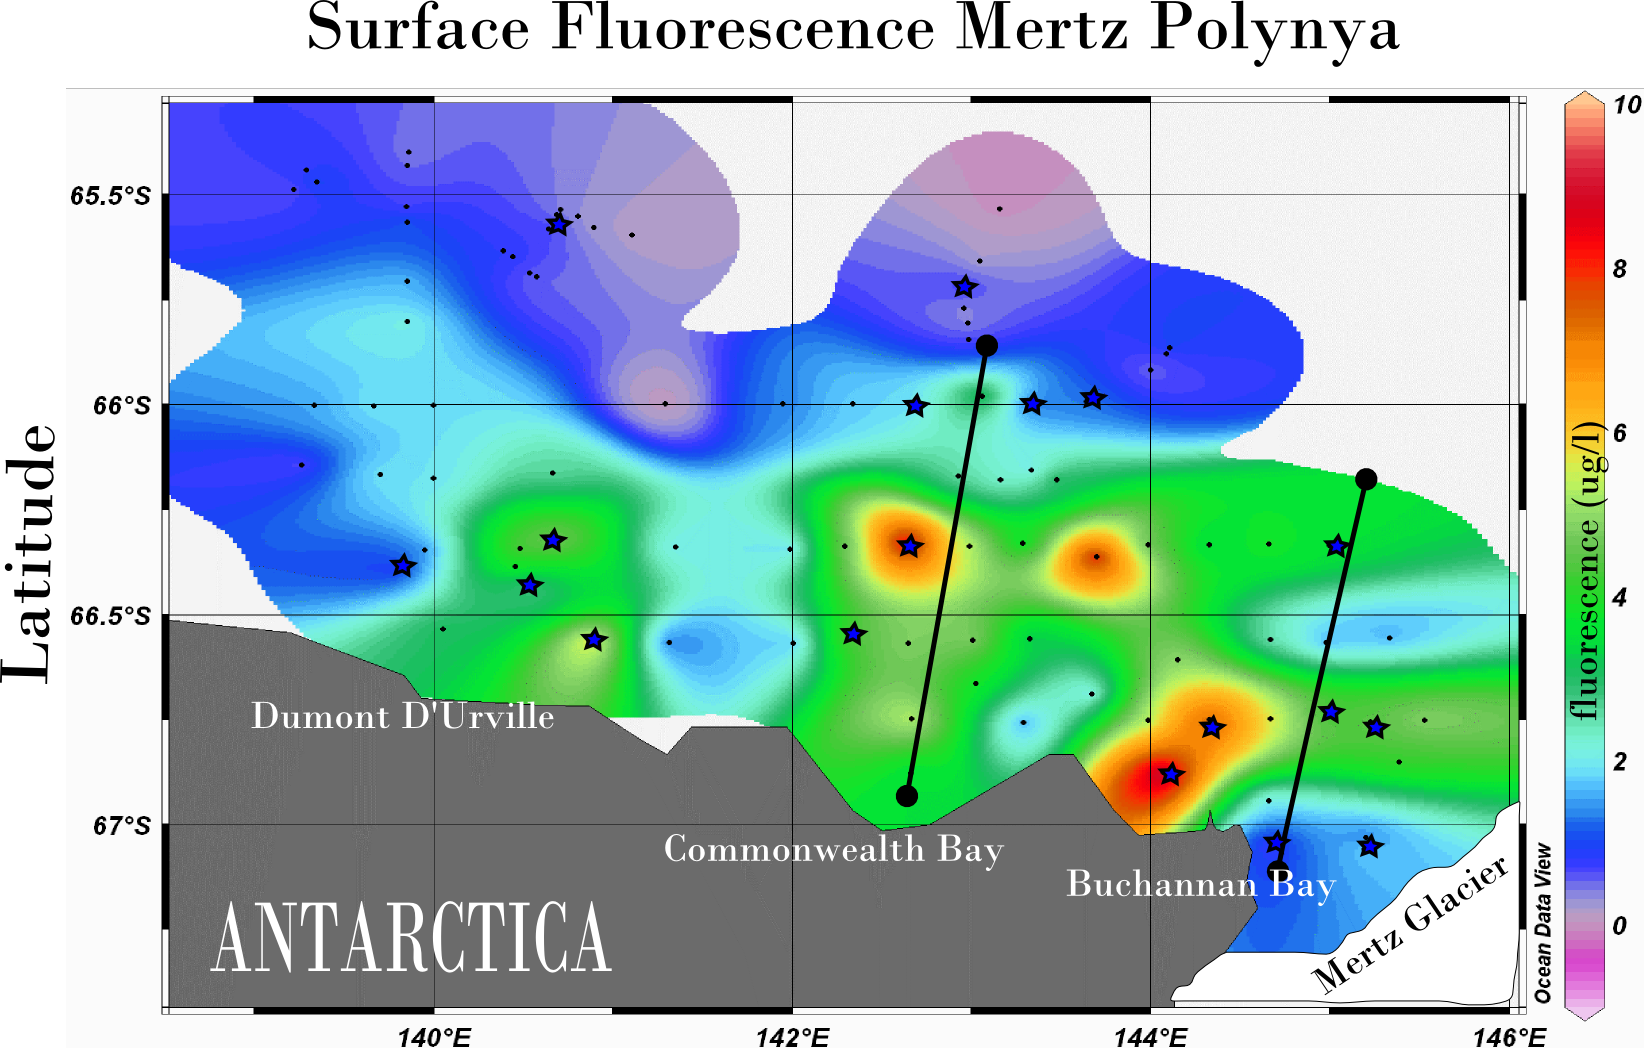 Fluorescence map of the Mertz Polynya in December 2007 (mertz Glacier is in lower right).  Surface blooms are in red, and marine metagenomic samples were taken in areas marked with a star.